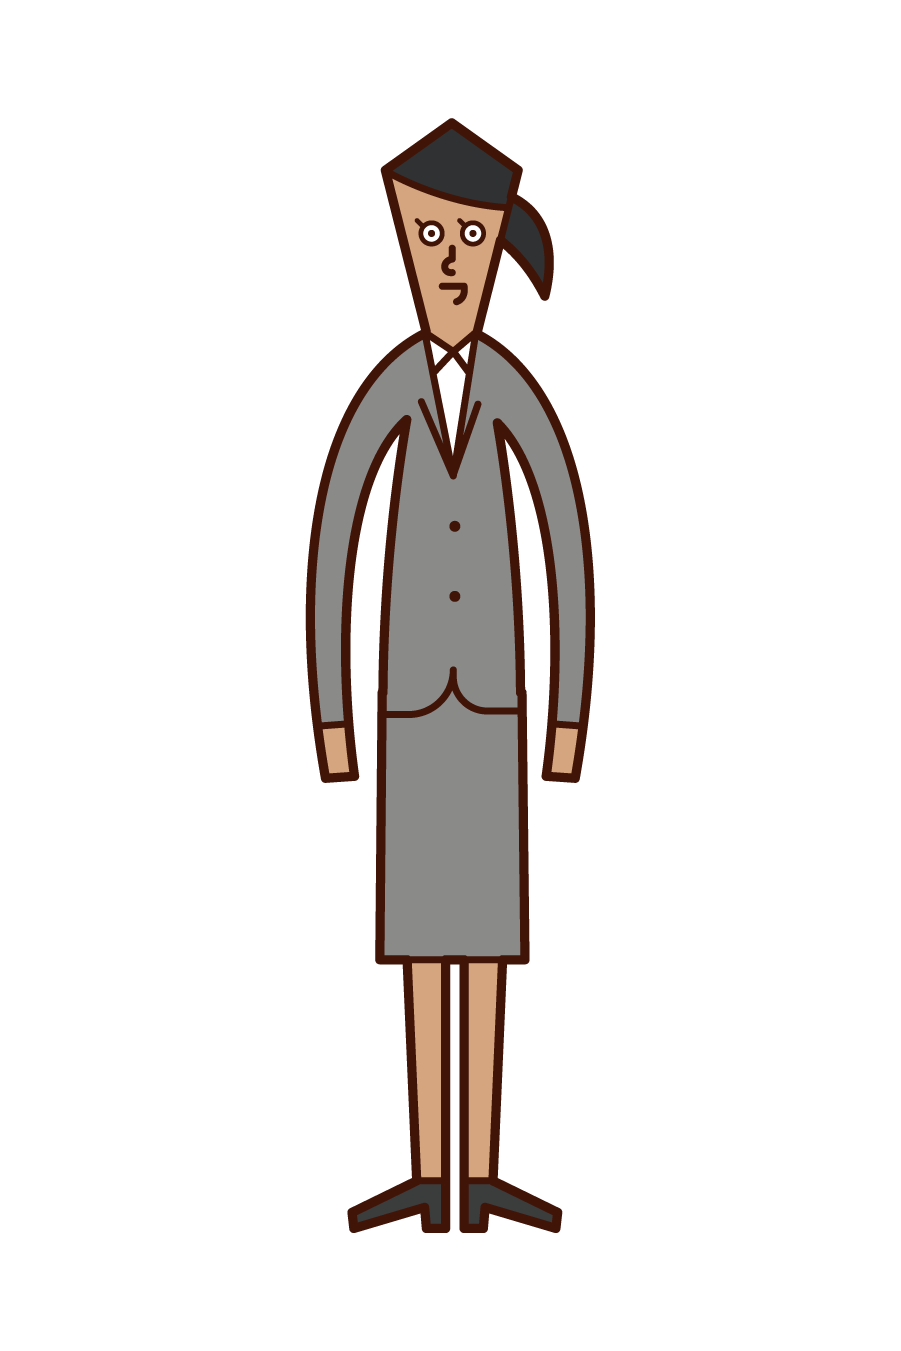 Illustration of a woman in a suit